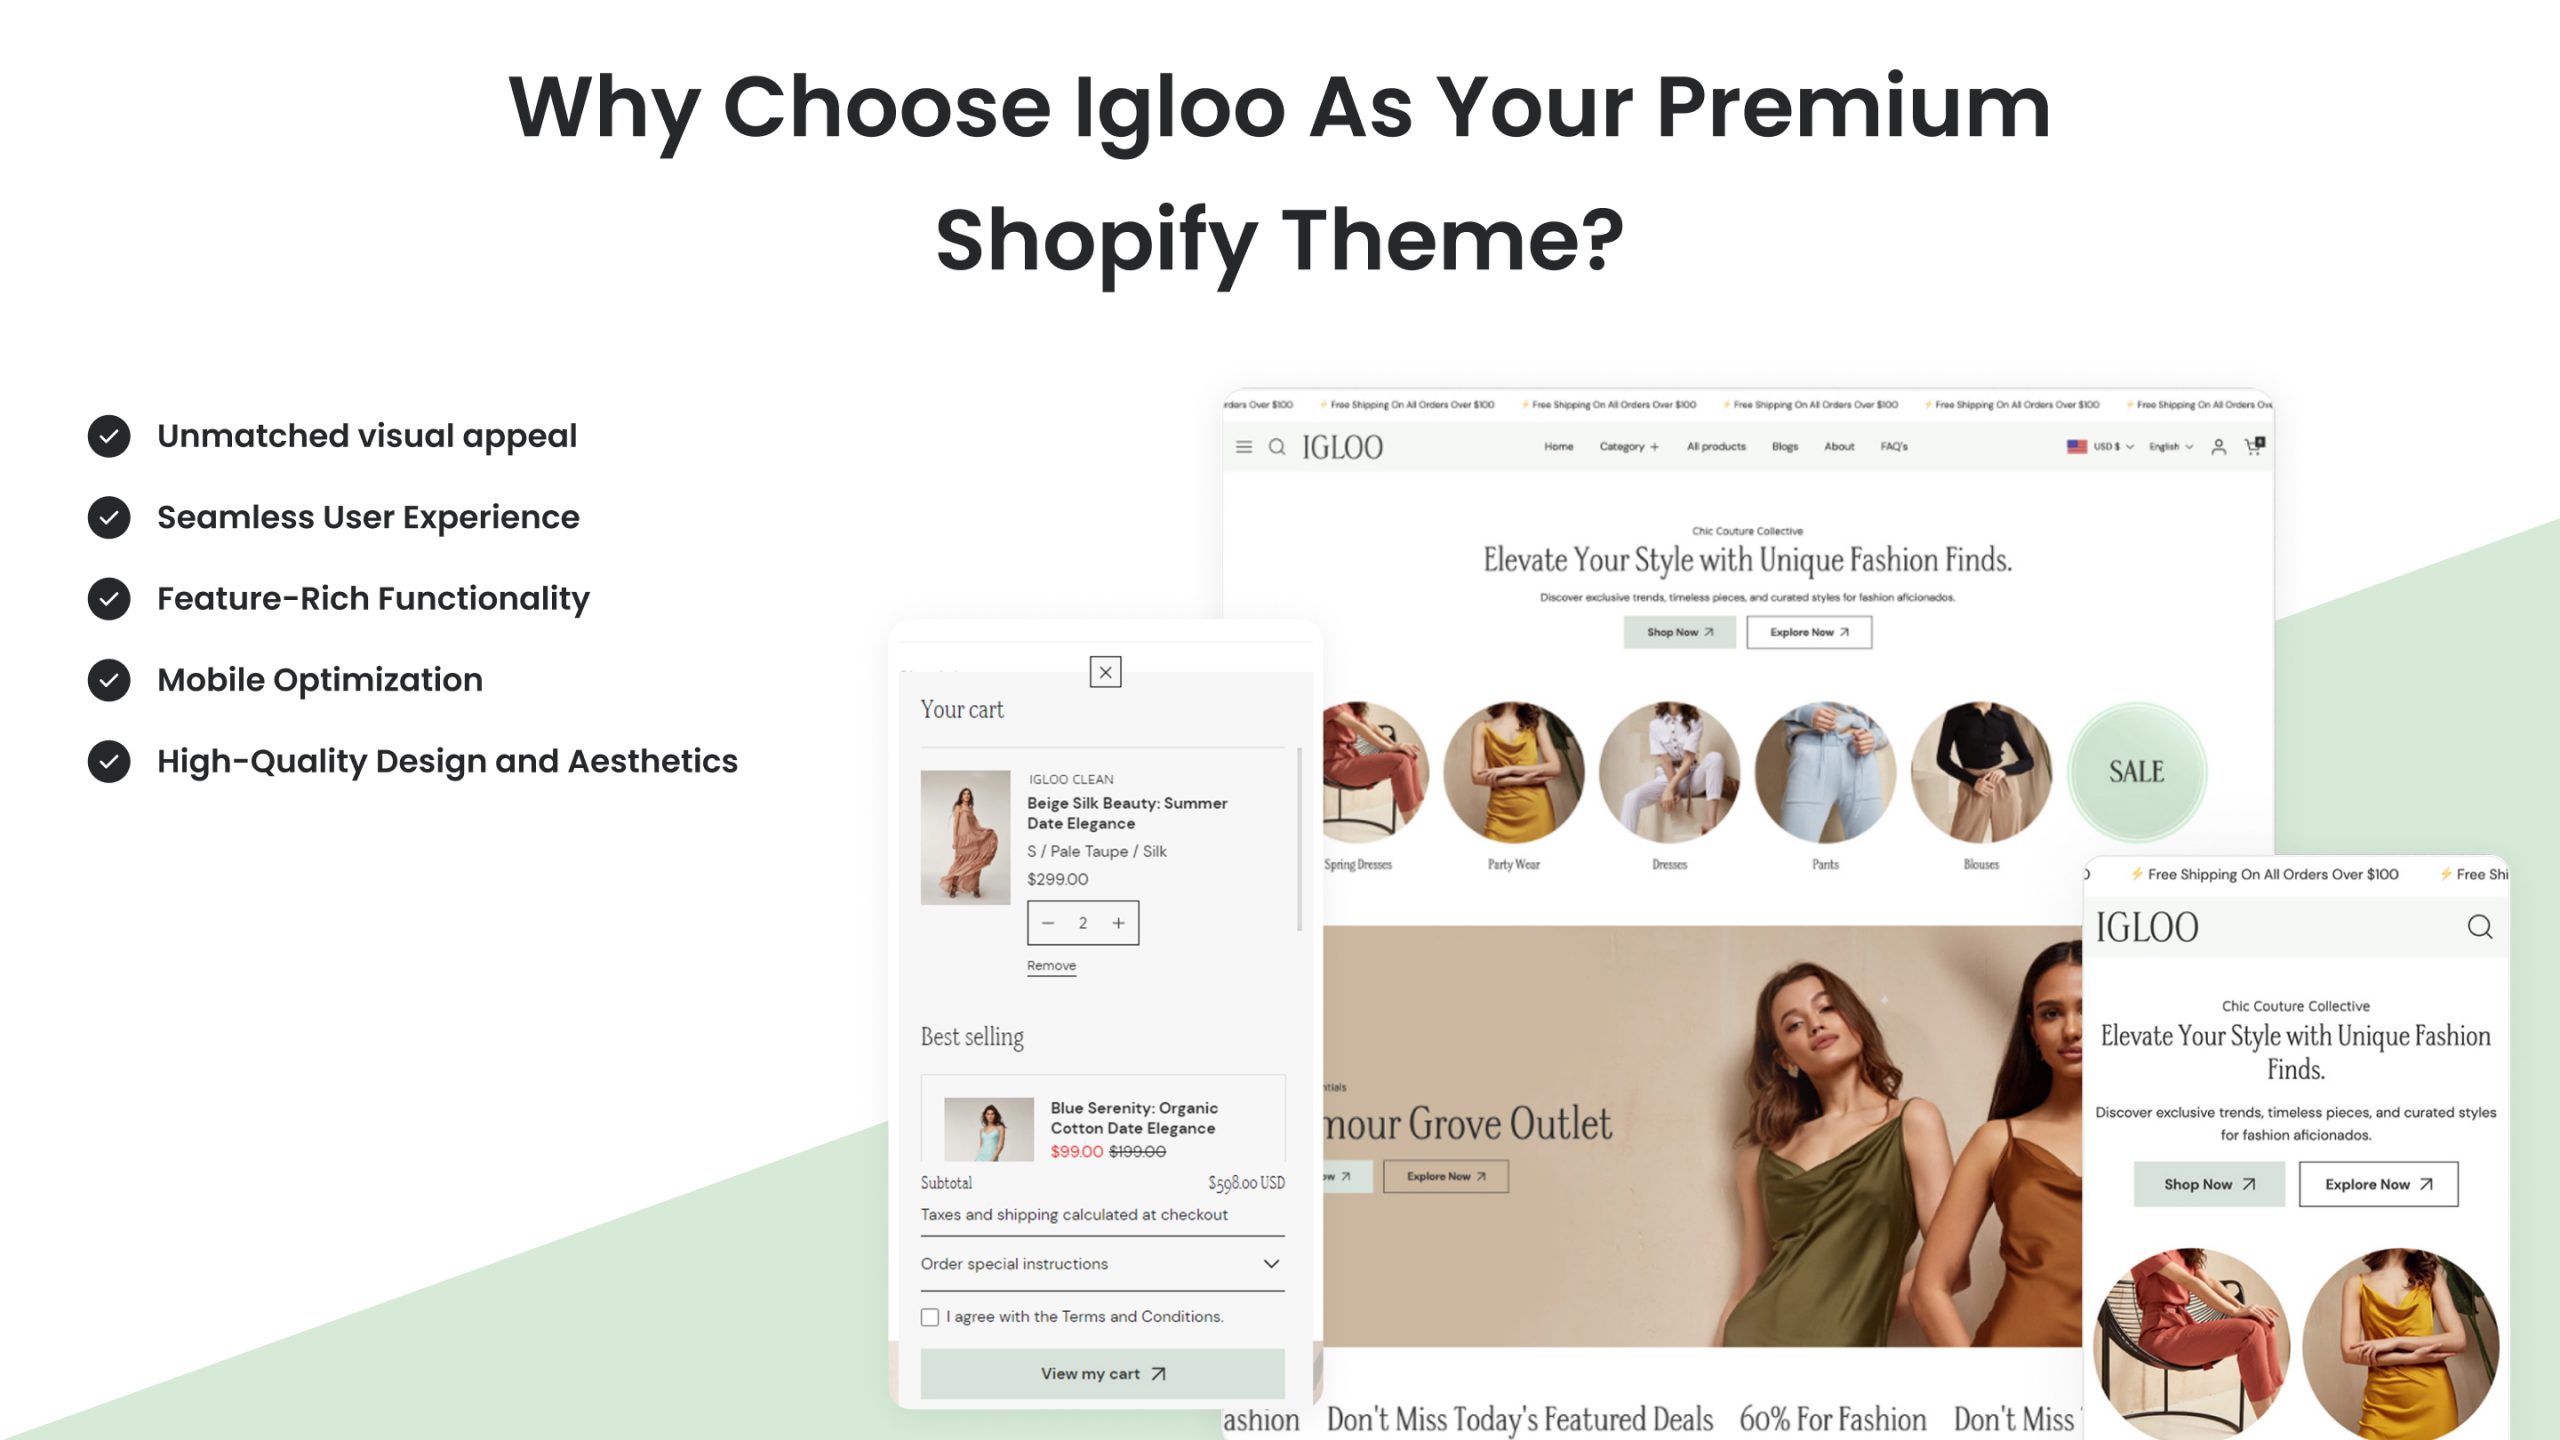 Why choose Igloo as your premium Shopify theme?